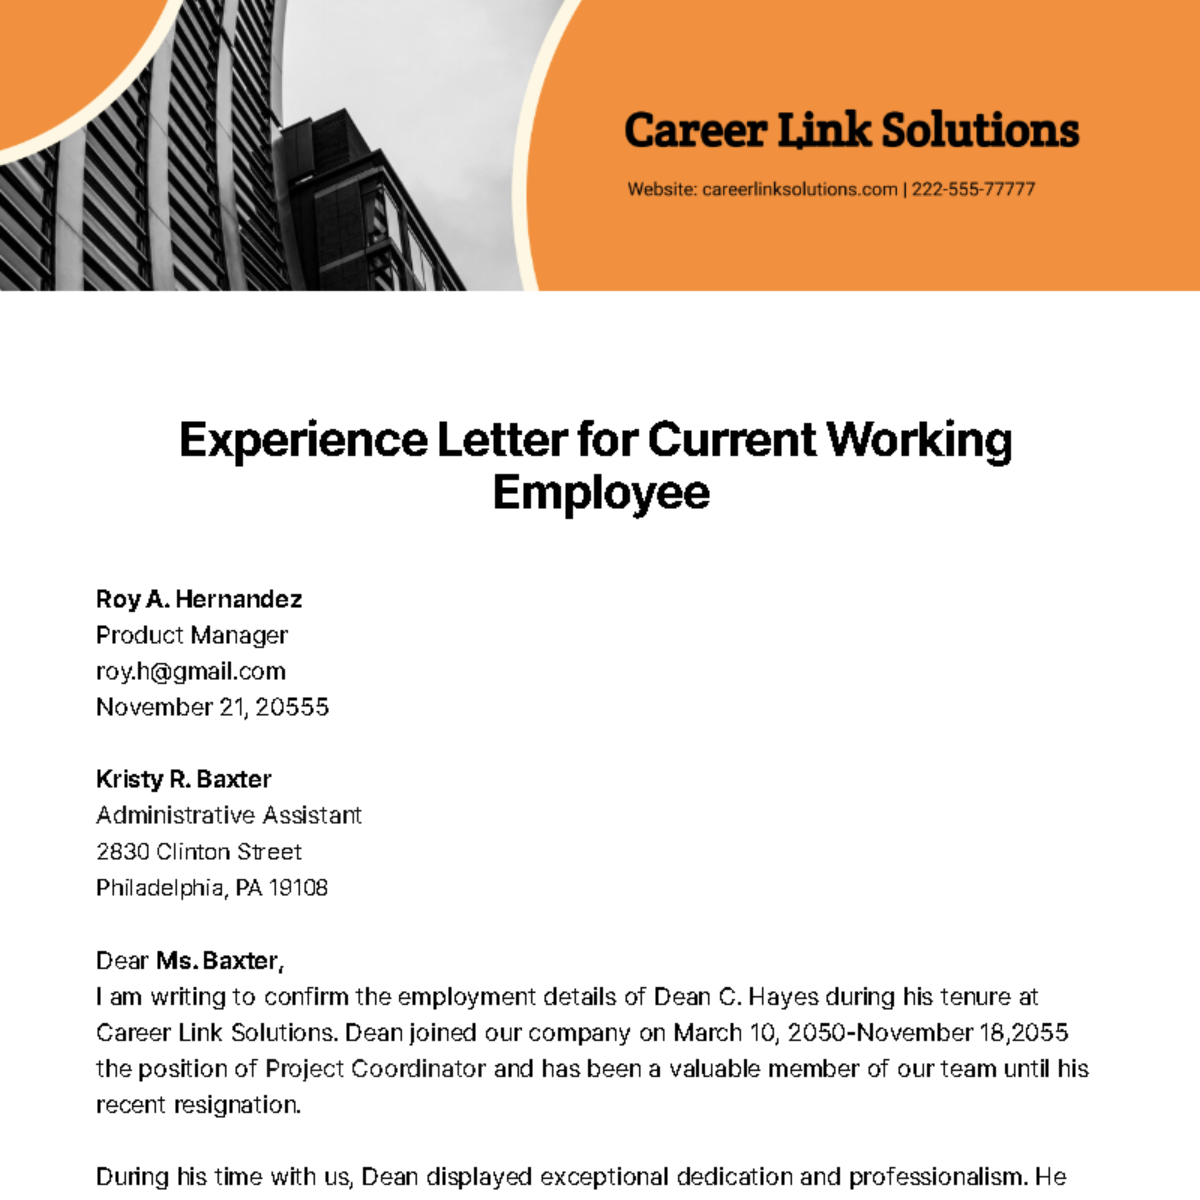 Experience Letter for Current Working Employee   Template